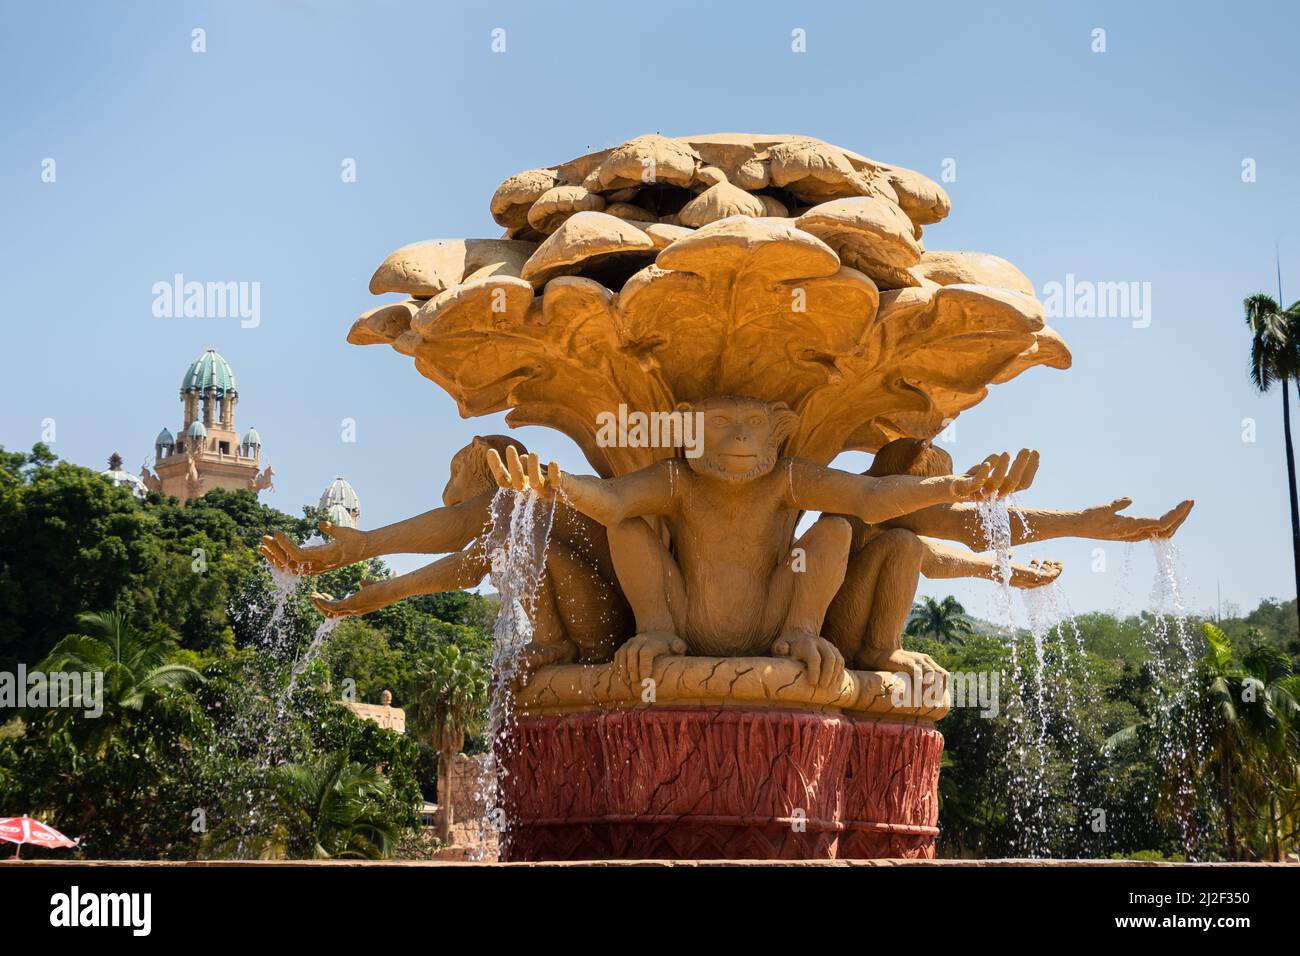 Fountain at the entrance of the Wave Valley of the SUN CITY resort in South Africa. It is adorned with several monkeys. Stock Photo